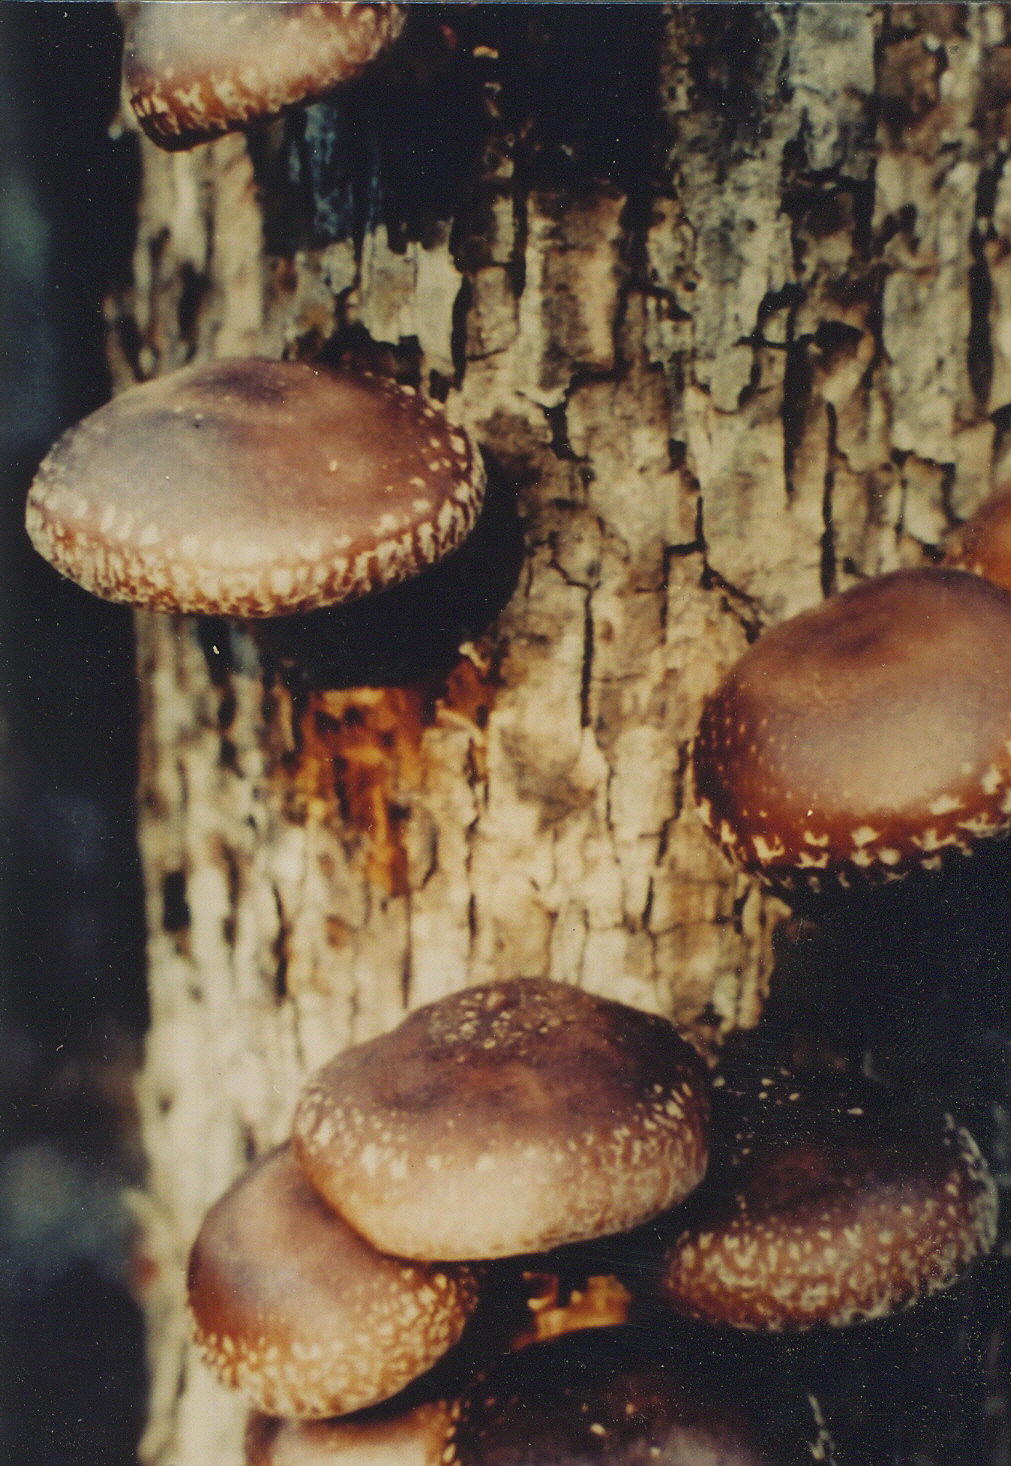 Shiitakes grown on logs-- Best flavor and highest nutritional and health benefits. Get mushrooms every 2 months for 3-4 years from one log -- every month with 2 logs!